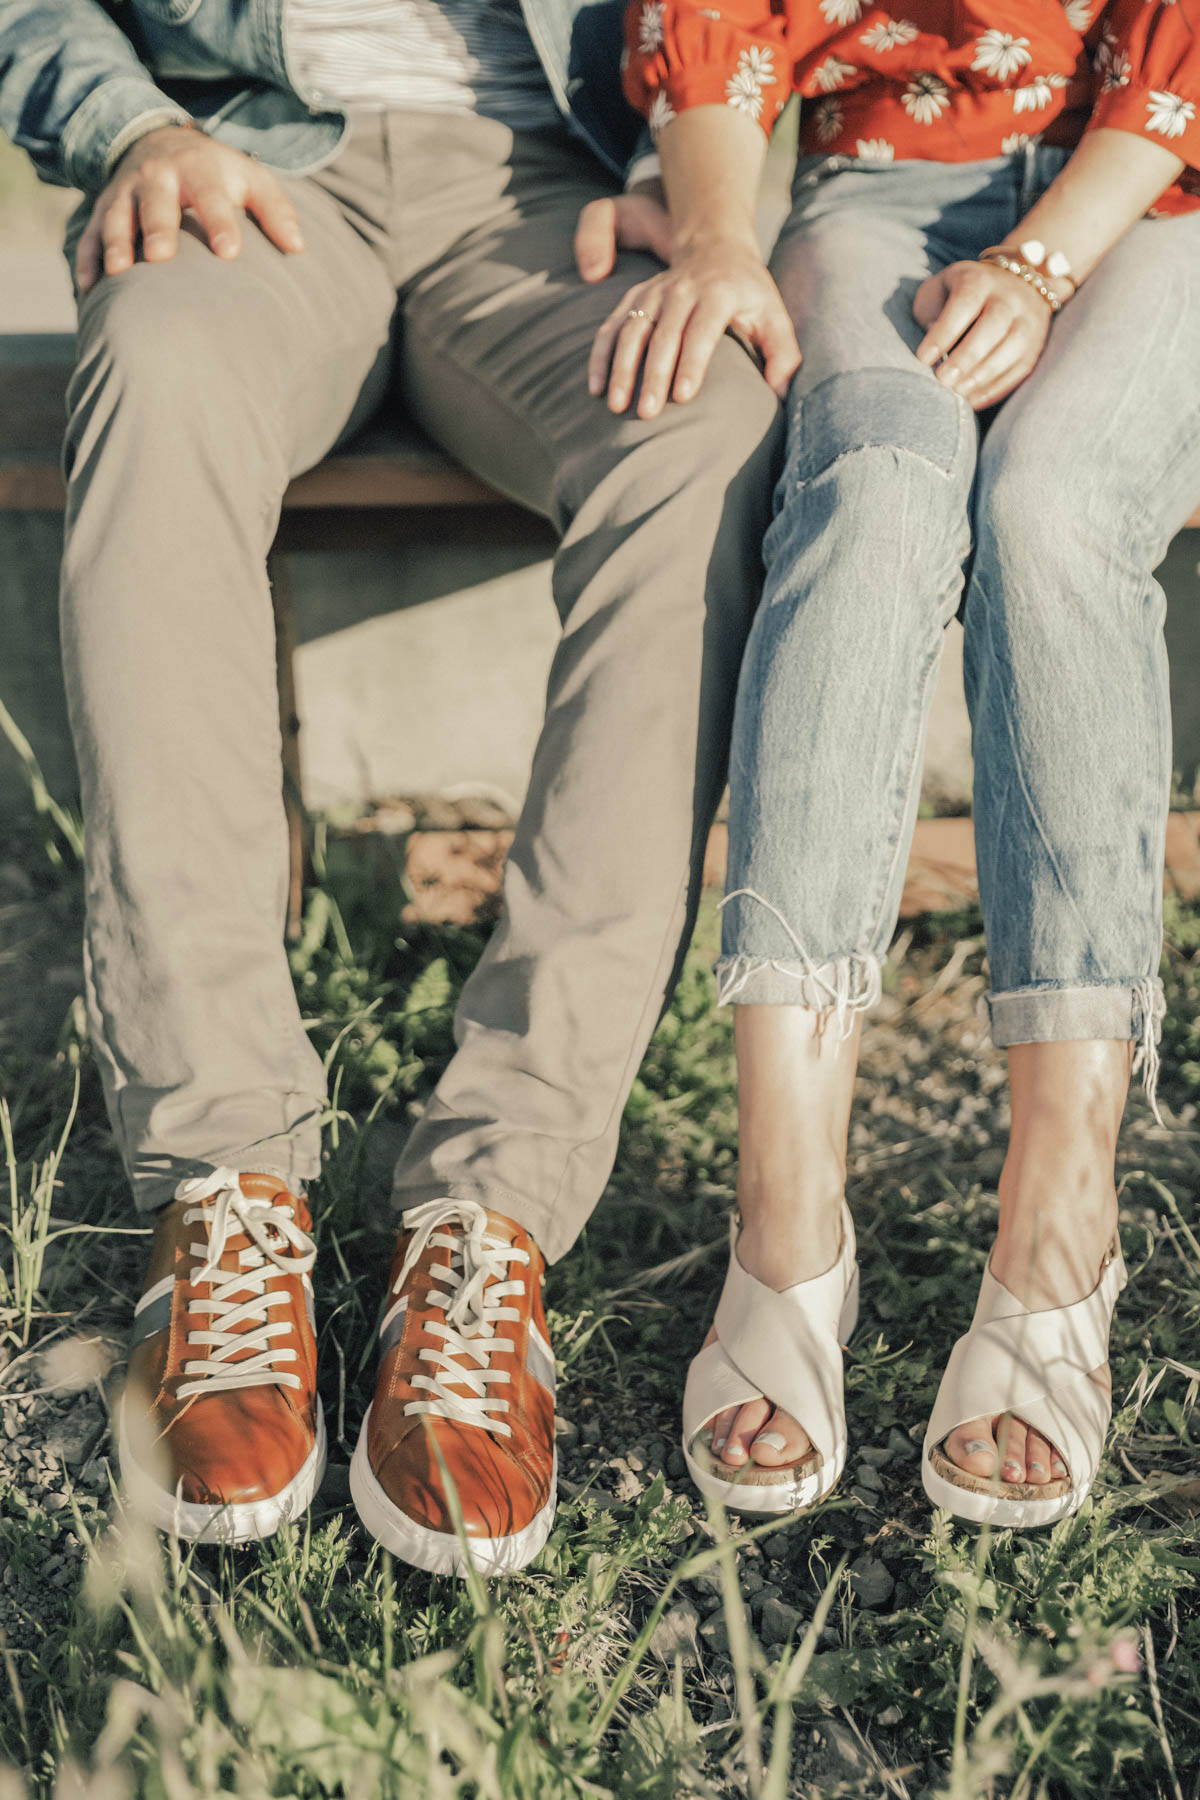 4 Ways to Maintain Your Independence in a Serious Relationship